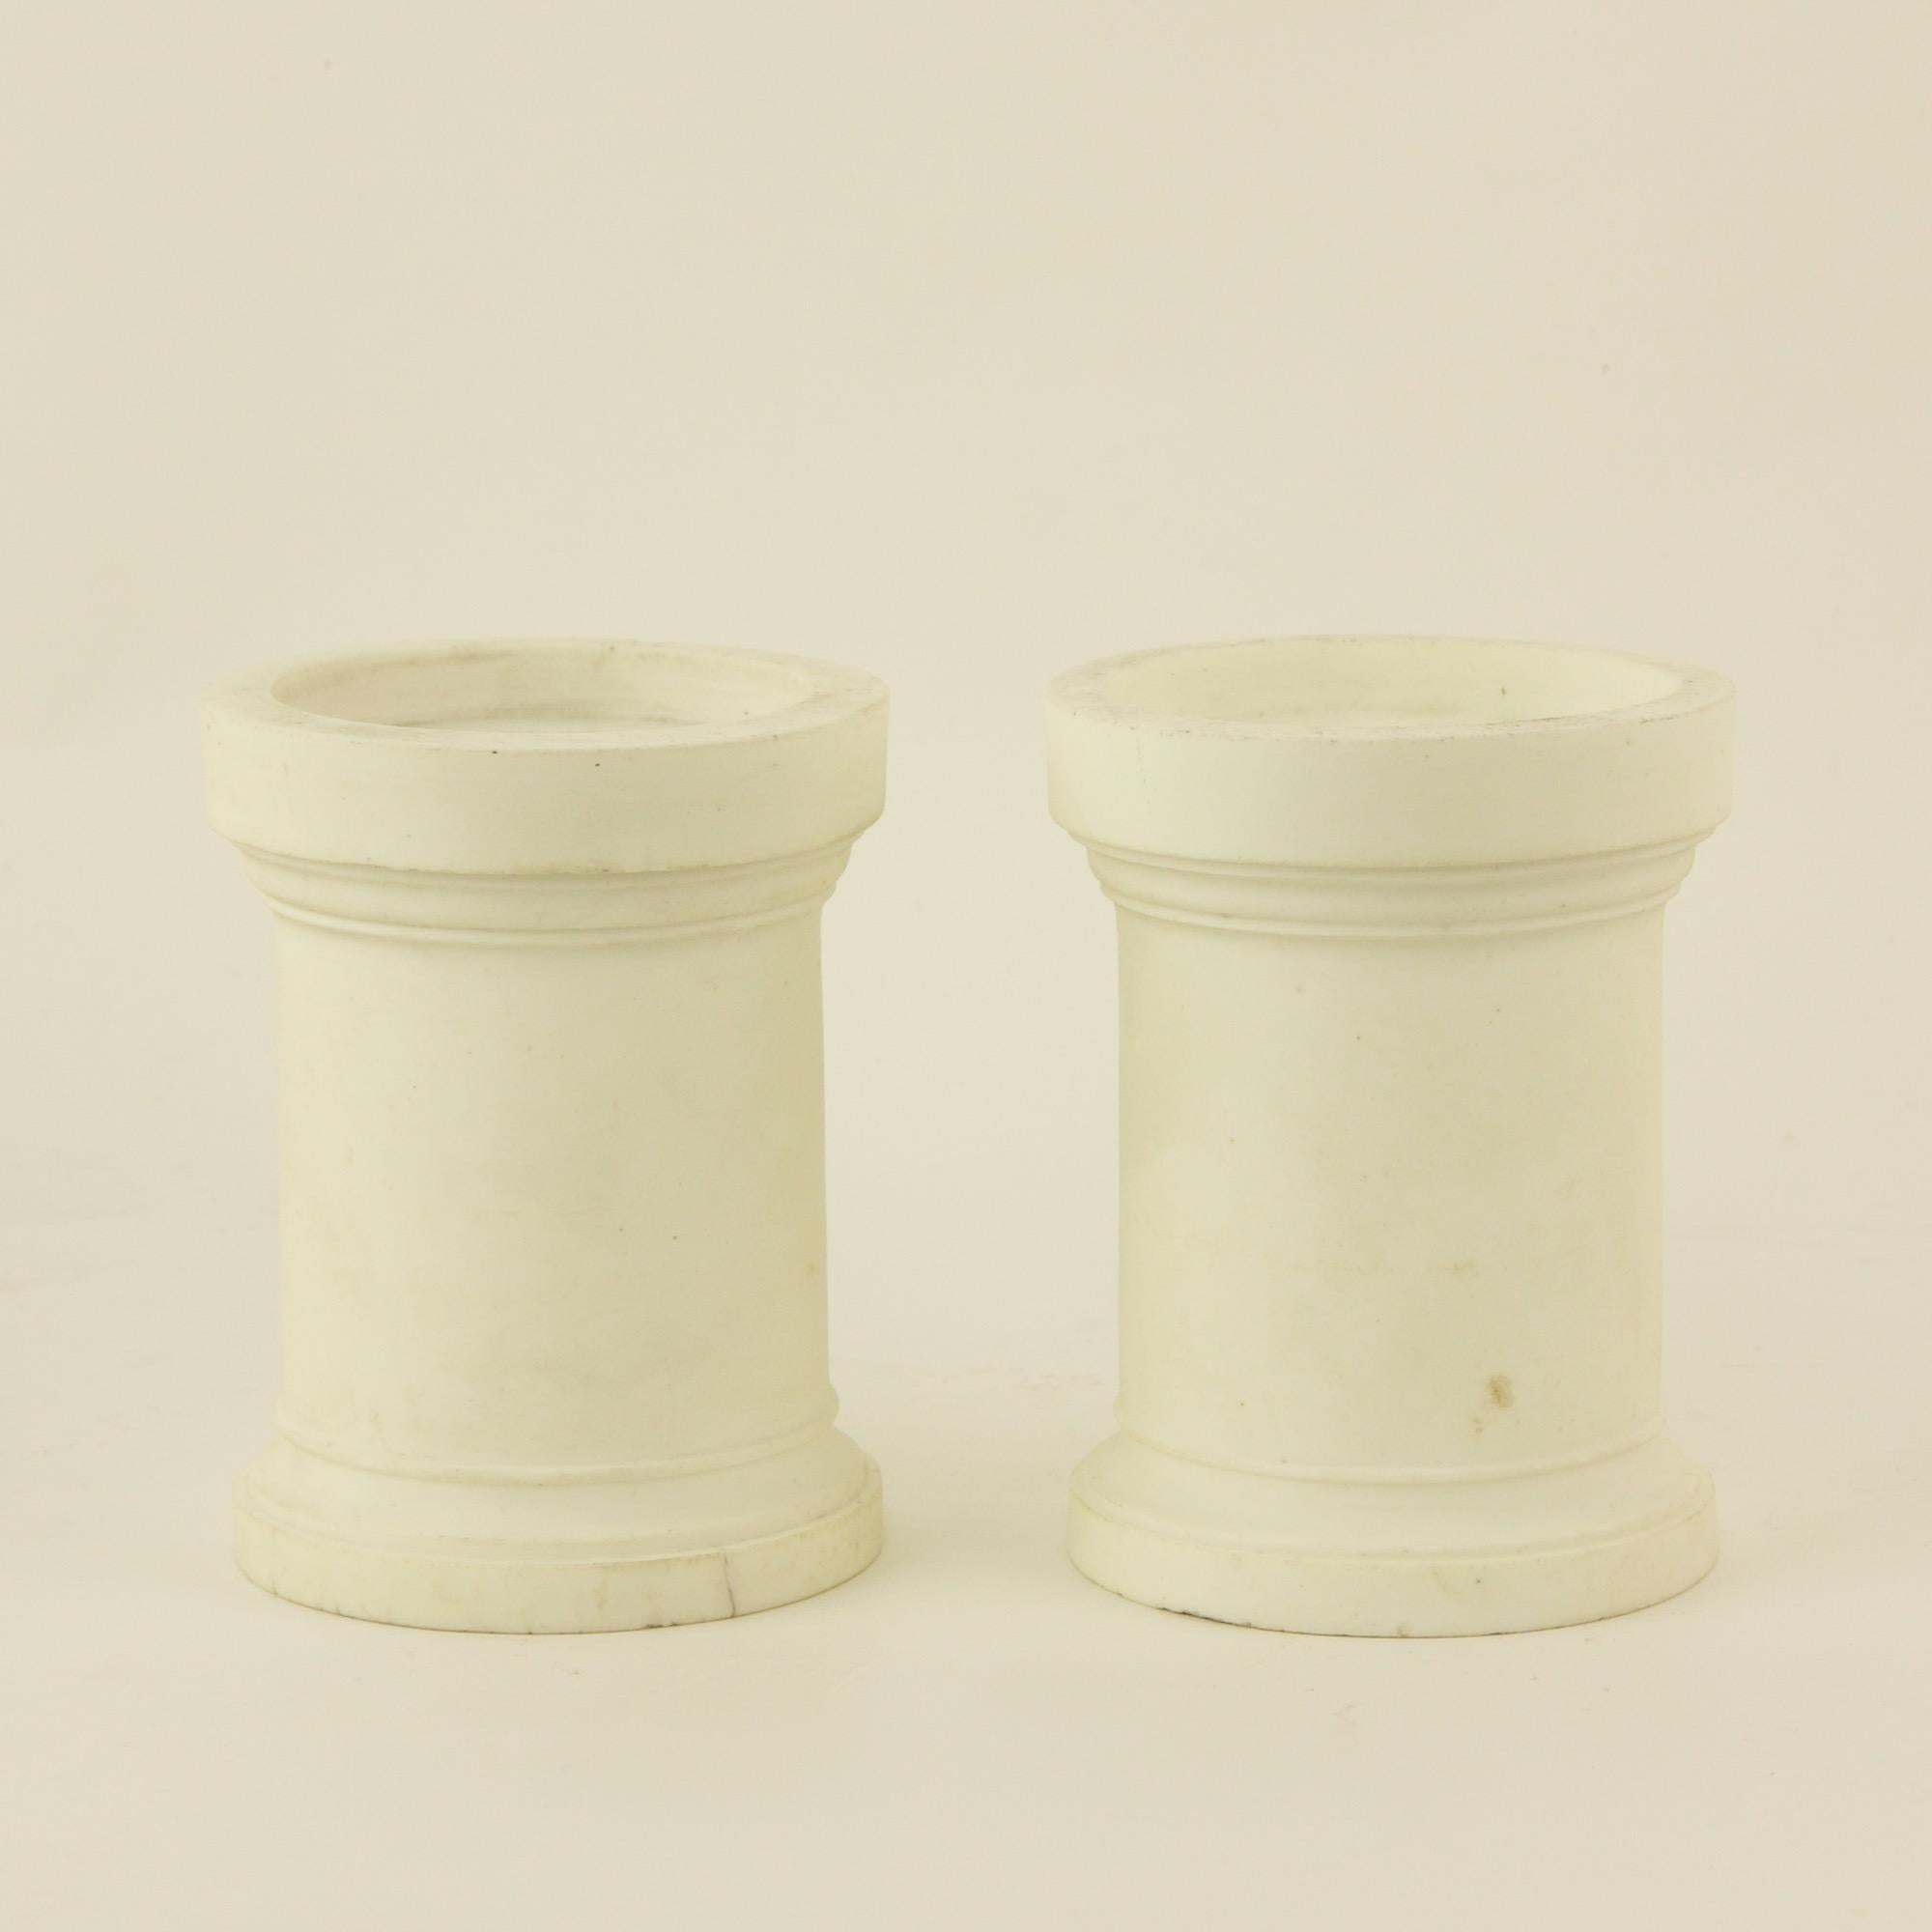 Pair of French Mid-18th Century Biscuit Porcelain Louis XV Vases and Pedestals For Sale 9